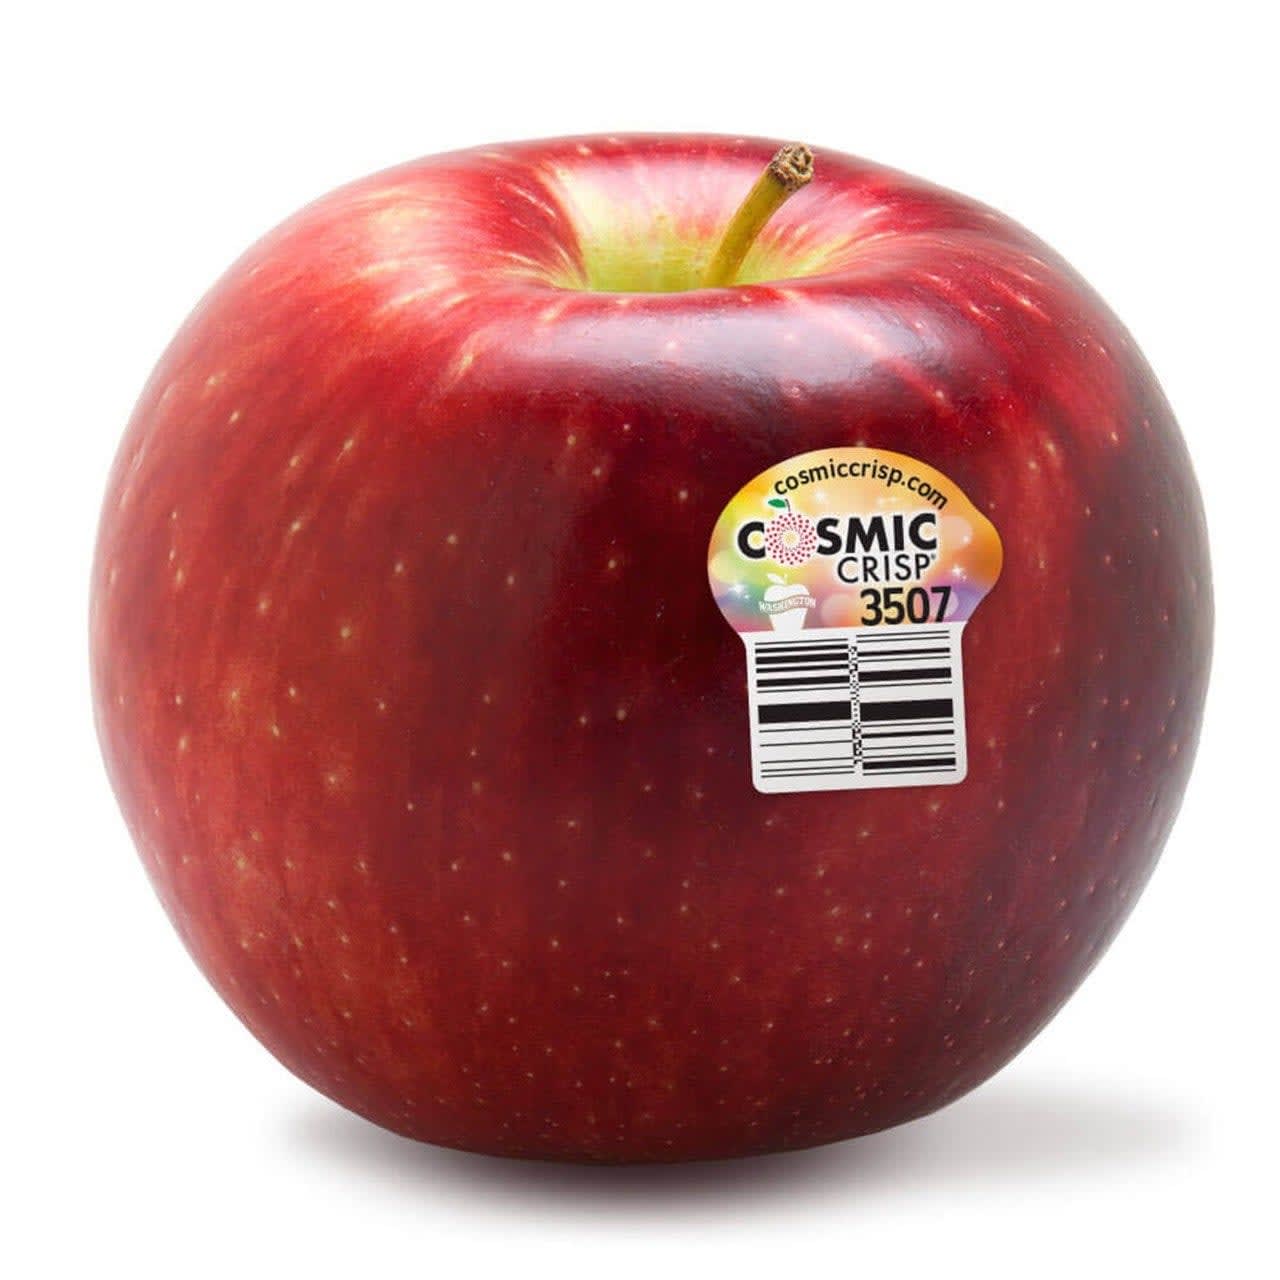 Meet Cosmic Crisp - the apple with the most expensive marketing campaign in history